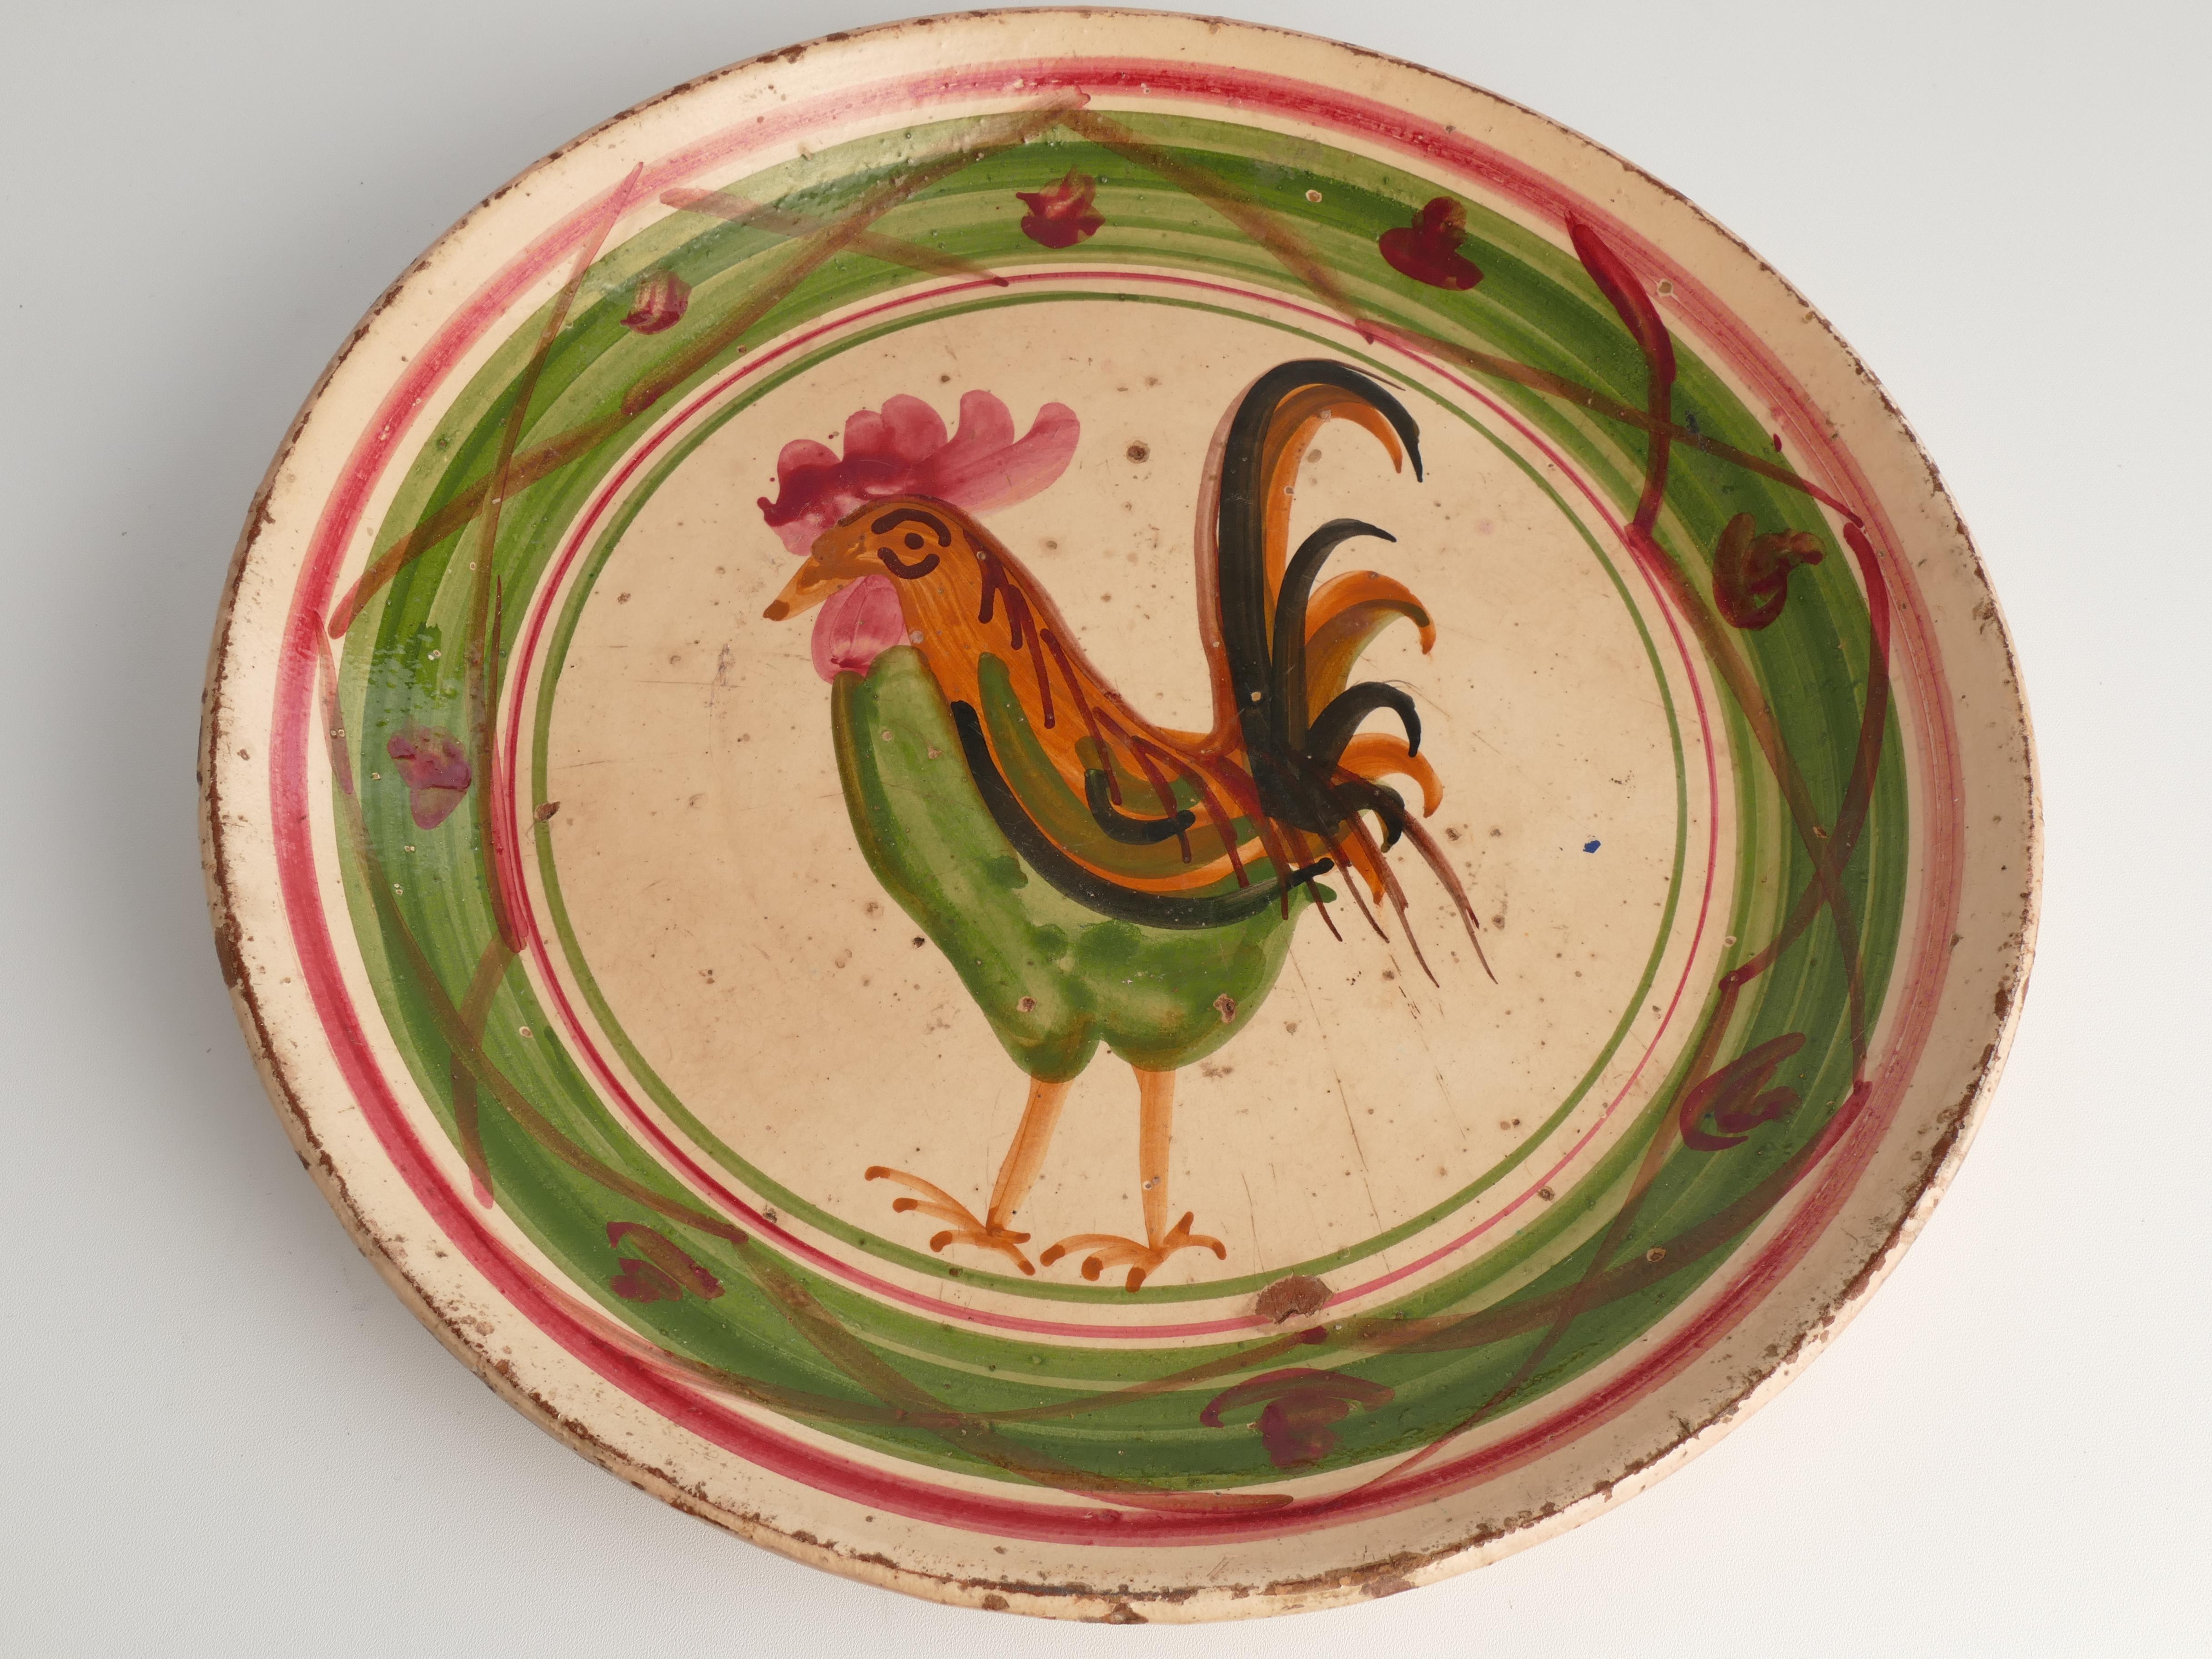 19th Century Swedish Folk Art Milk Bowl with Rooster Motif in Red, Green, and Br For Sale 1